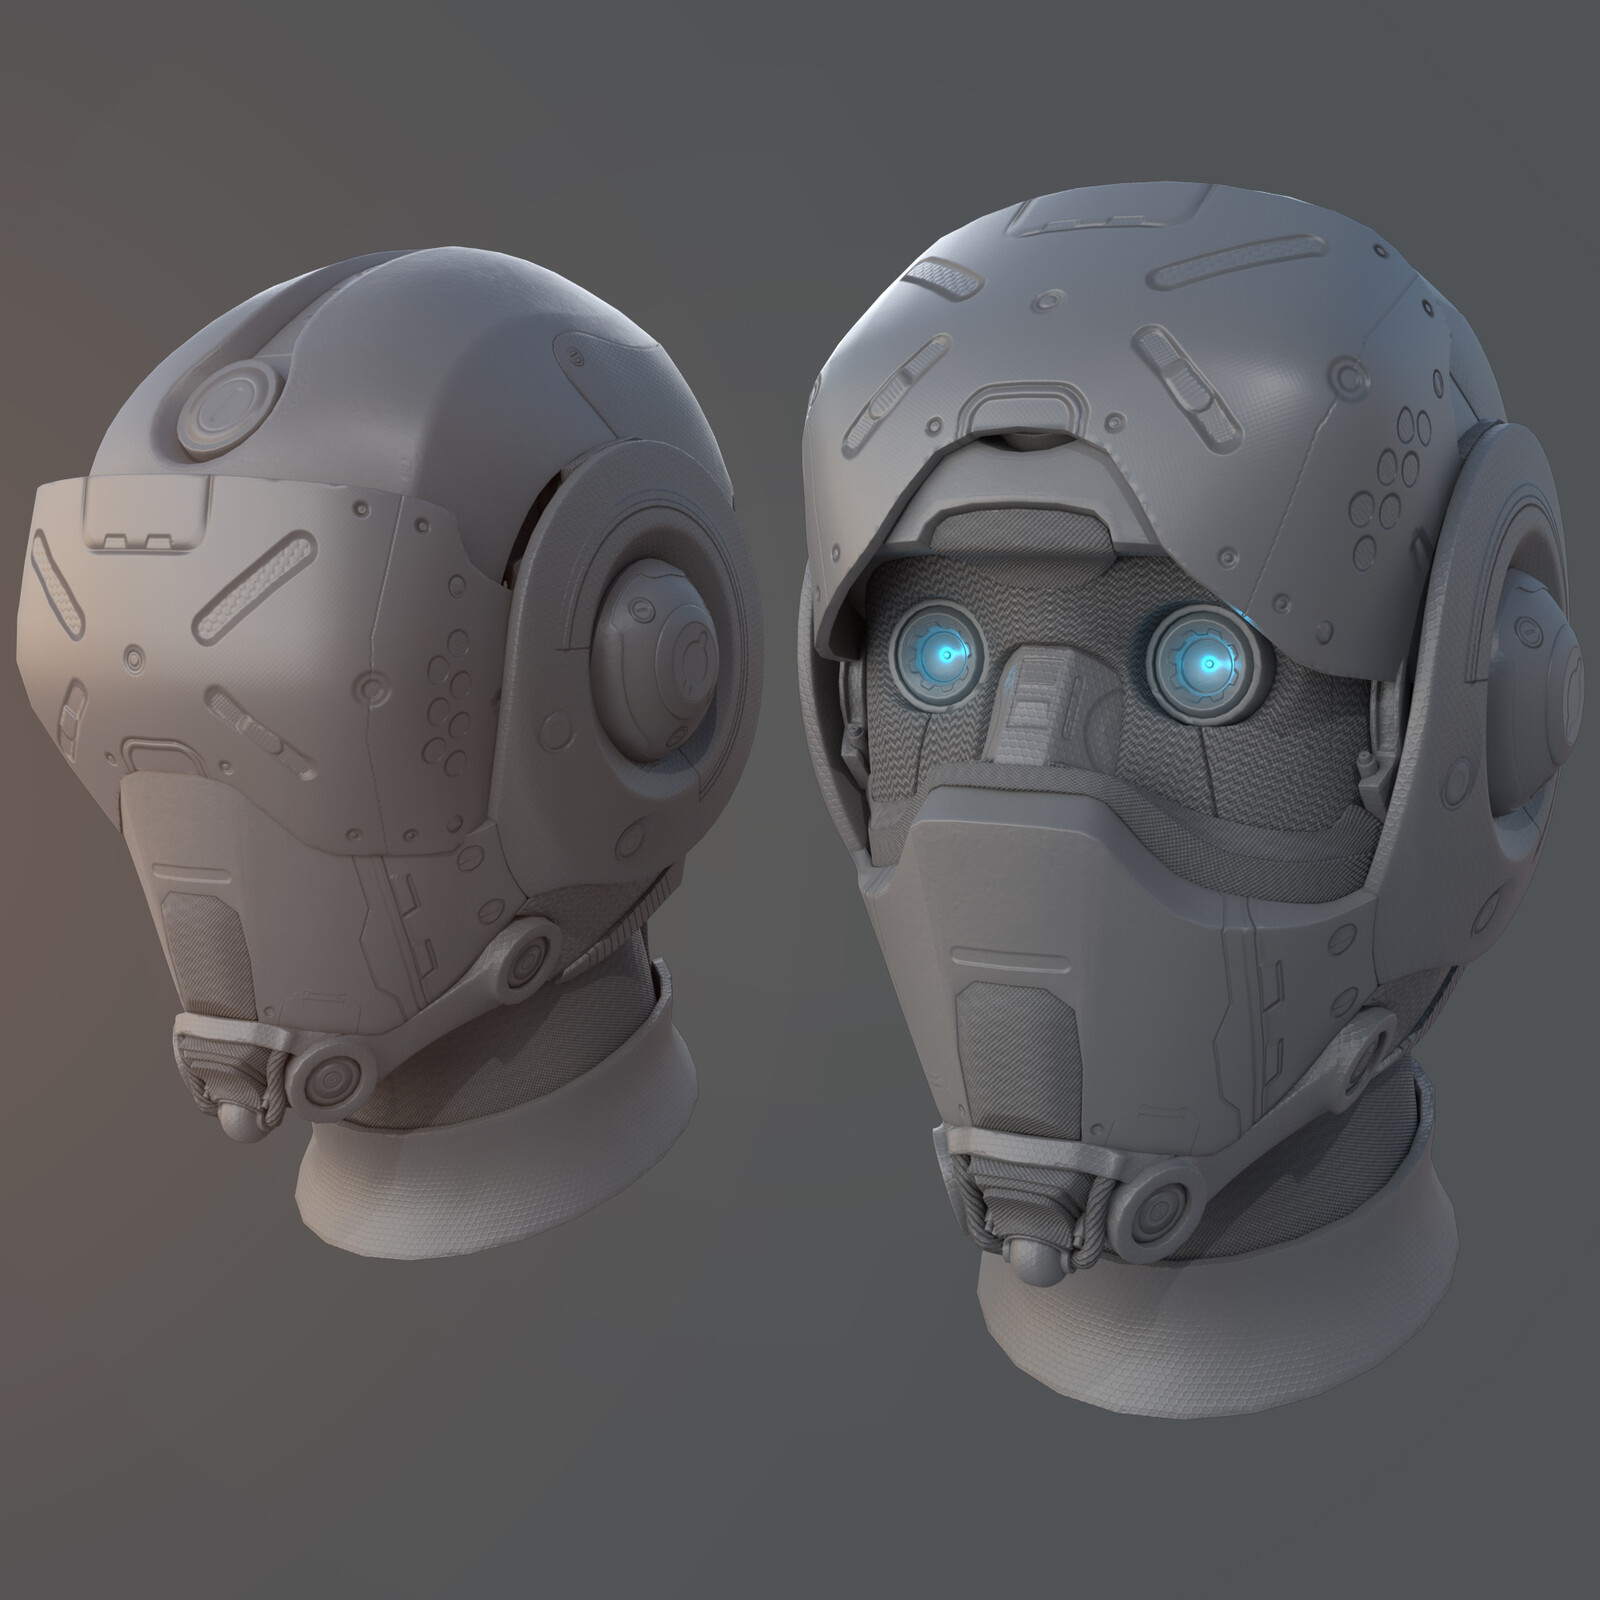 android squad. 3d cg character for my upcoming short film. modeled in maya, textured in substance painter and rendered by arnold.